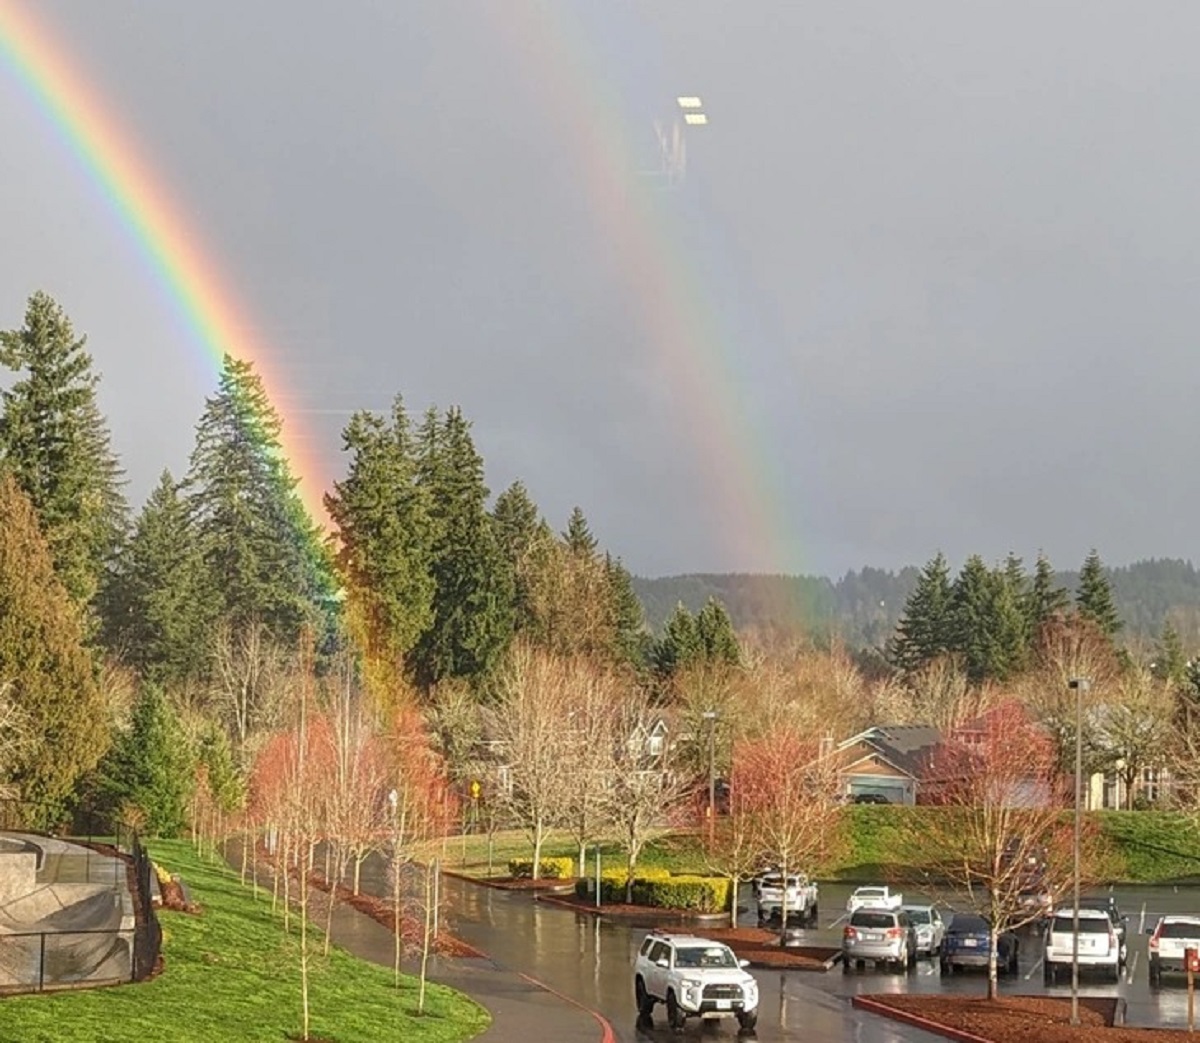 In the parking lot, a pair of rainbows appeared side by side. True beauty!